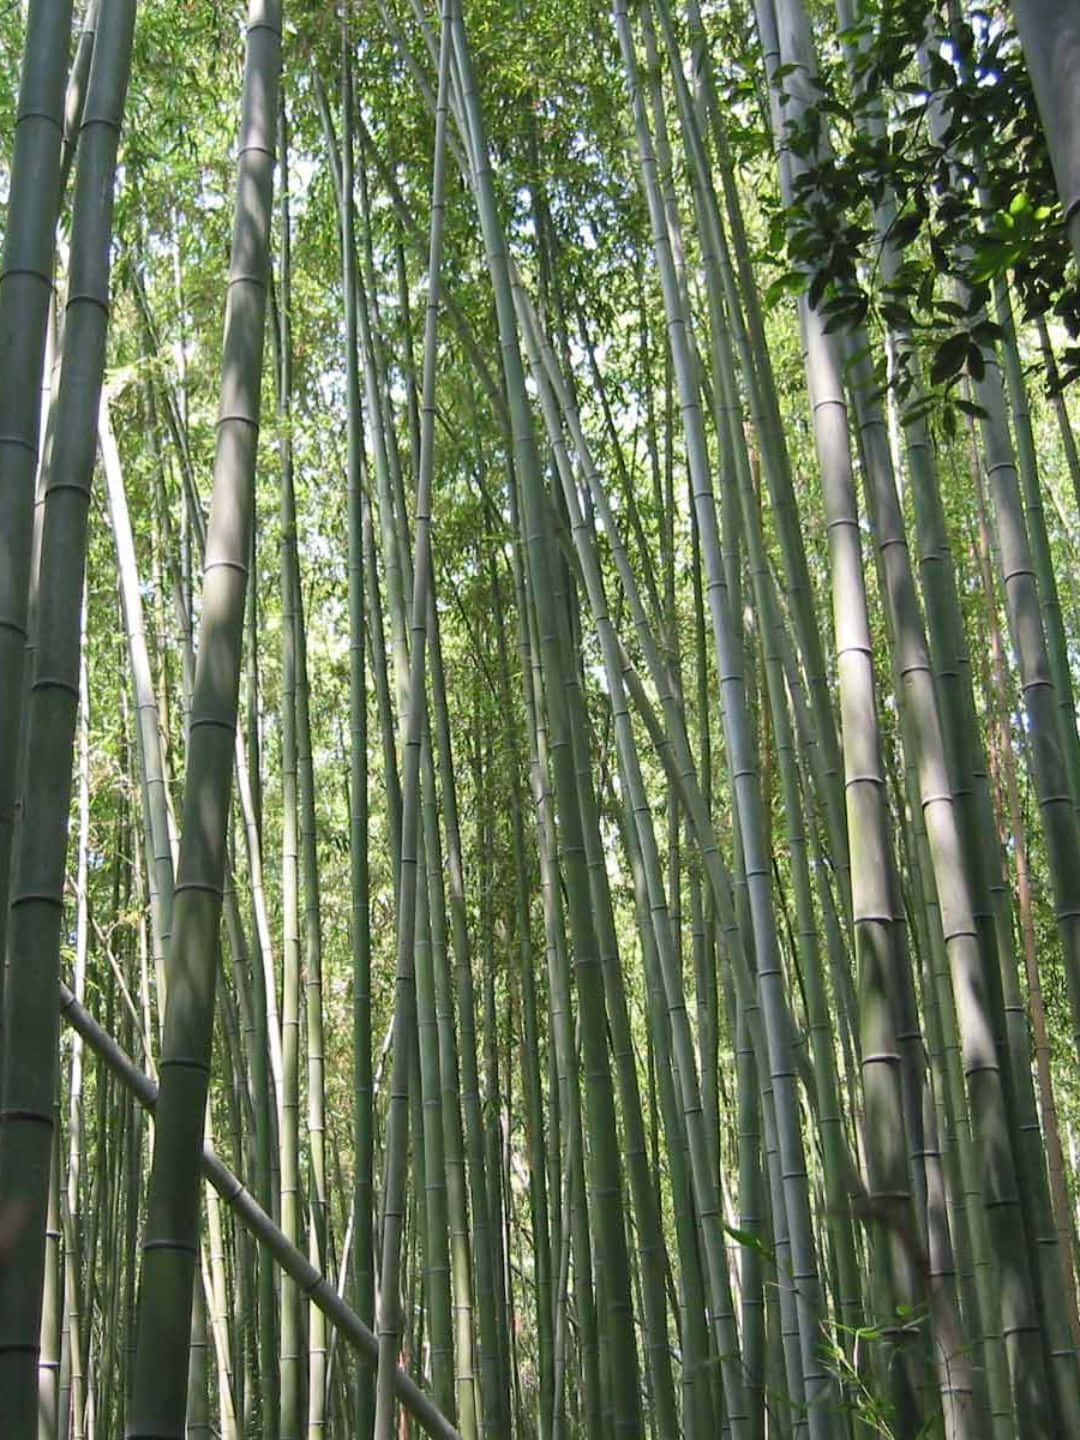 1440p Bamboo Background Tall Bamboos Trees With White Stems